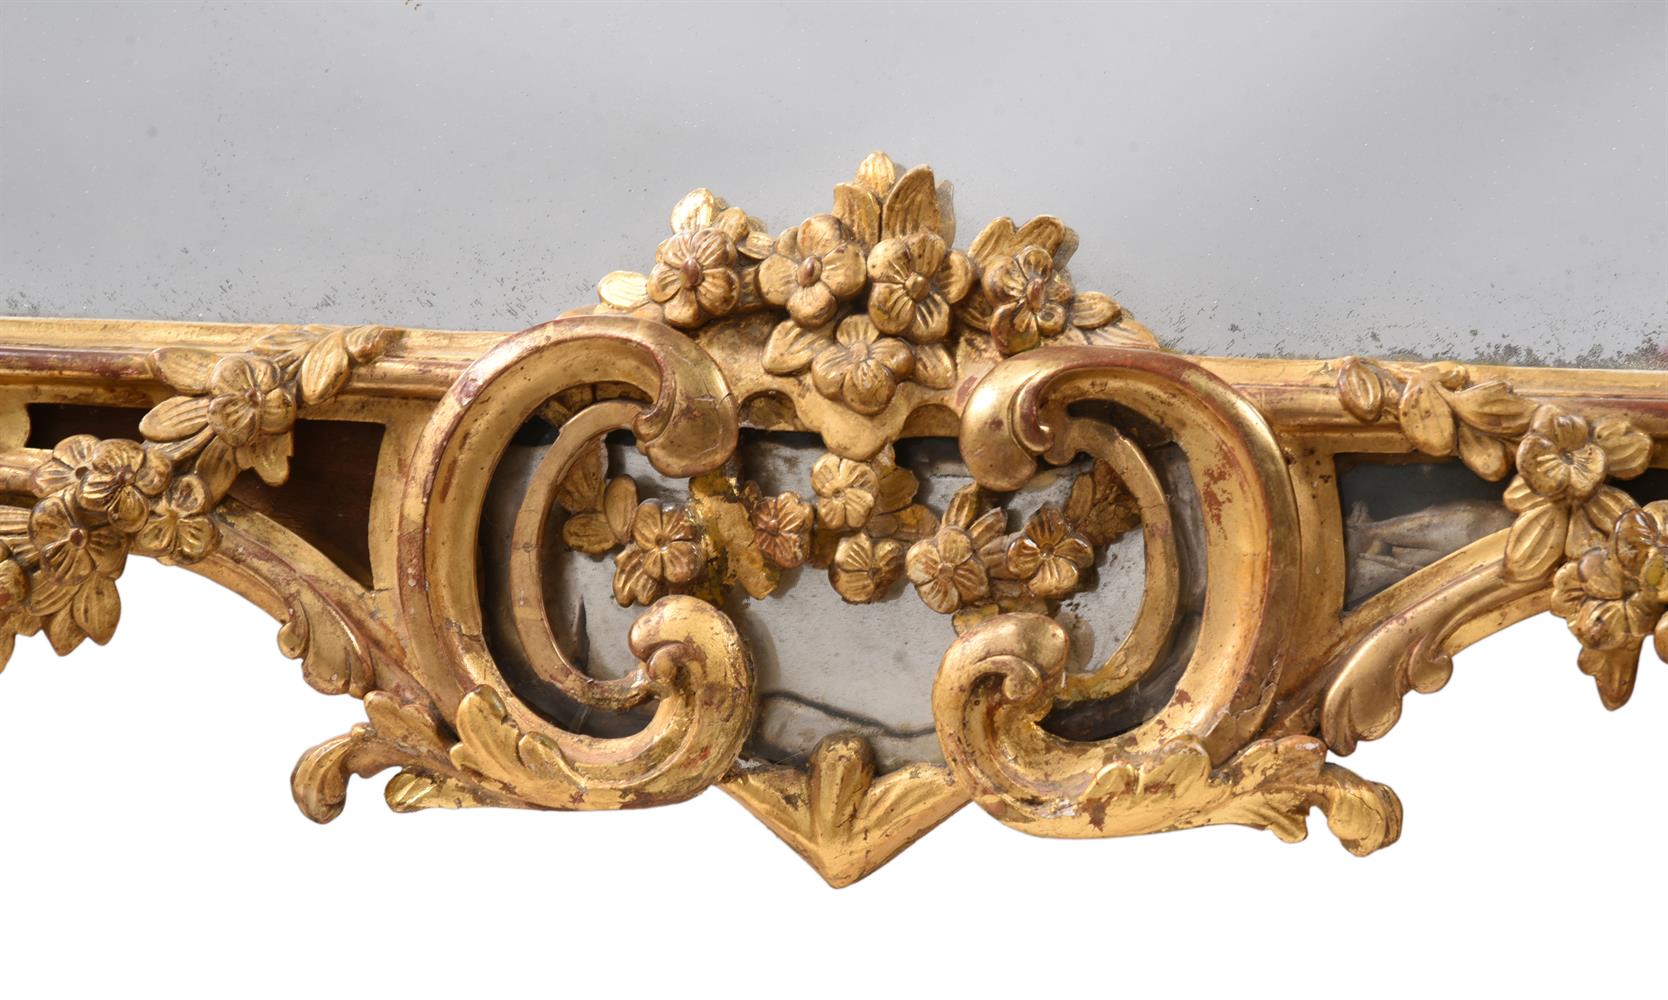 A LARGE FRENCH CARVED GILTWOOD MIRROR, IN RÉGENCE STYLE, 19TH CENTURY - Image 4 of 5